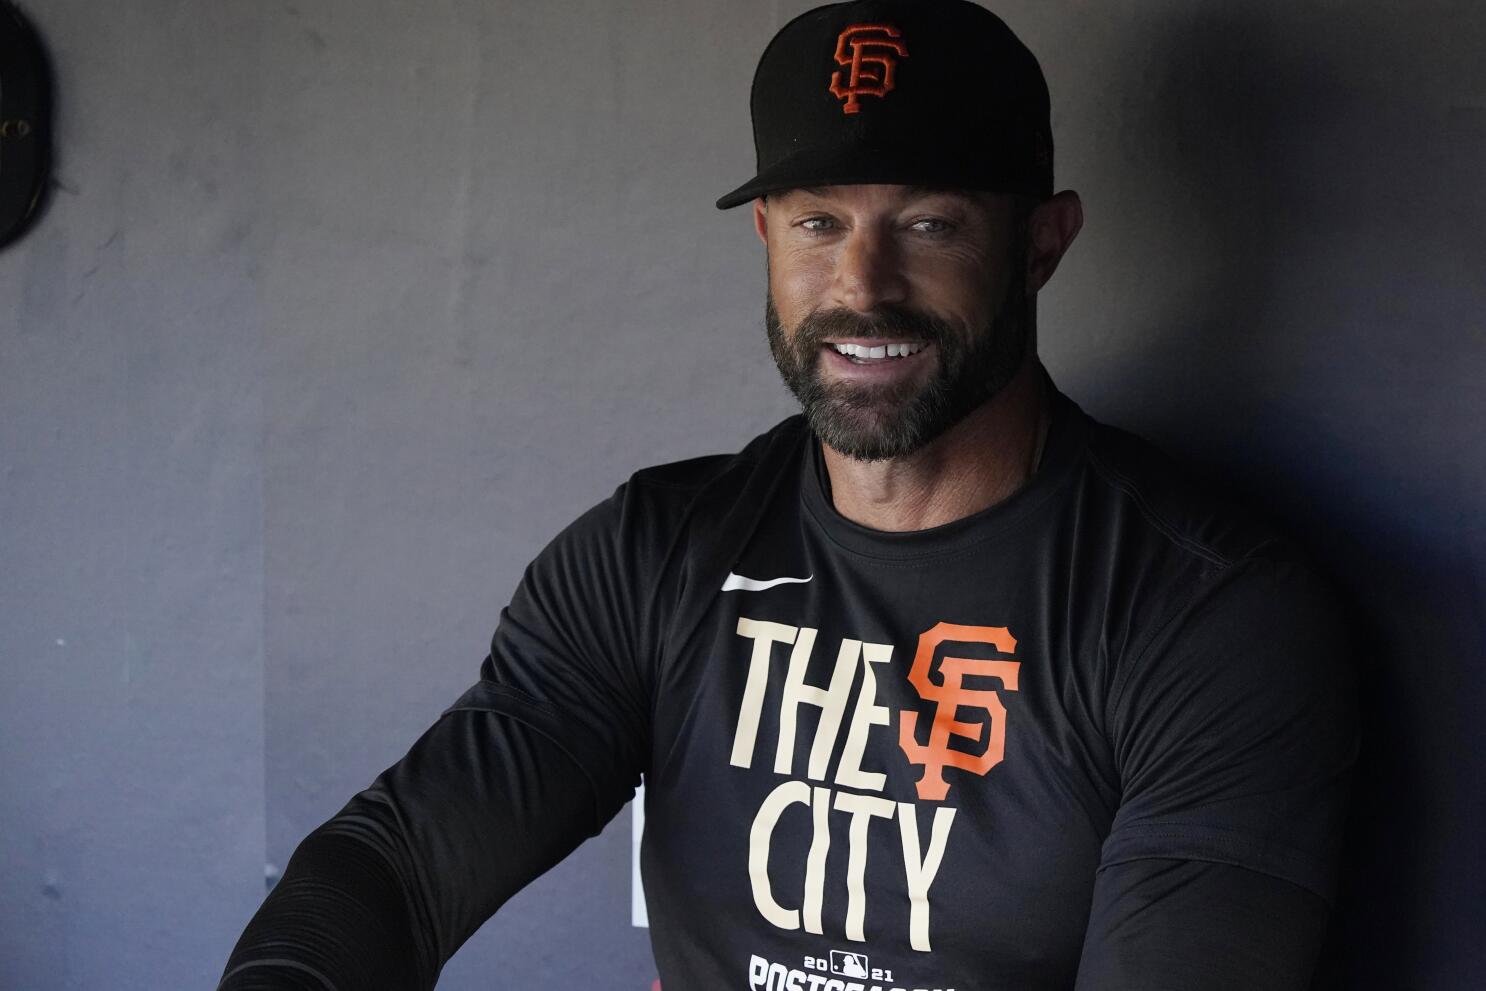 Gabe Kapler, nerves and all, has been right fit for Giants